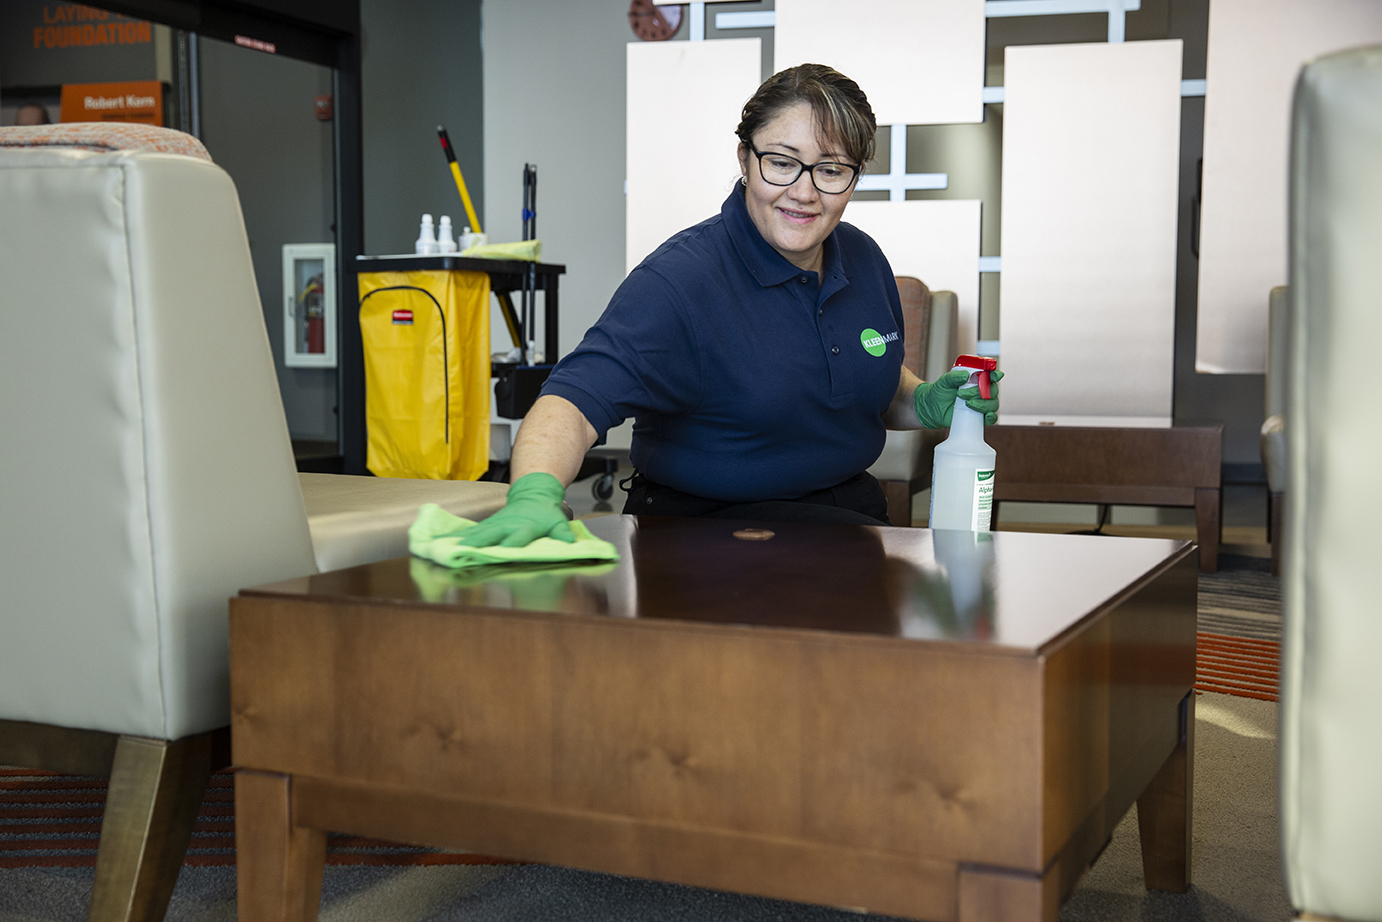 Our top cleaning resolution? Work with a team who has decades of industry experience, like KleenMark.